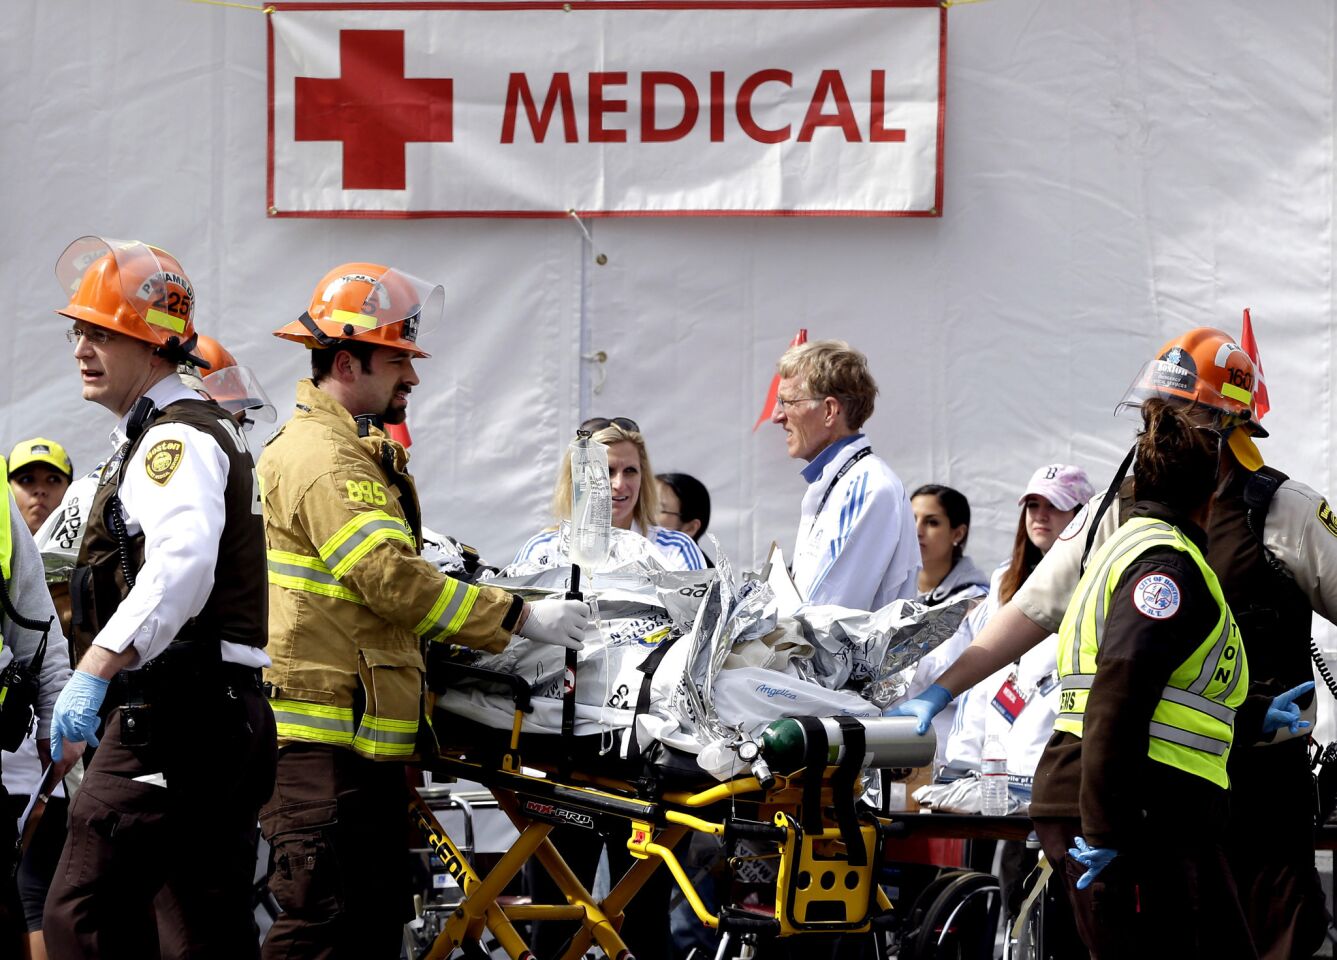 Medical personnel work outside the medical tent in the aftermath of two blasts near the finish line of the Boston Marathon.